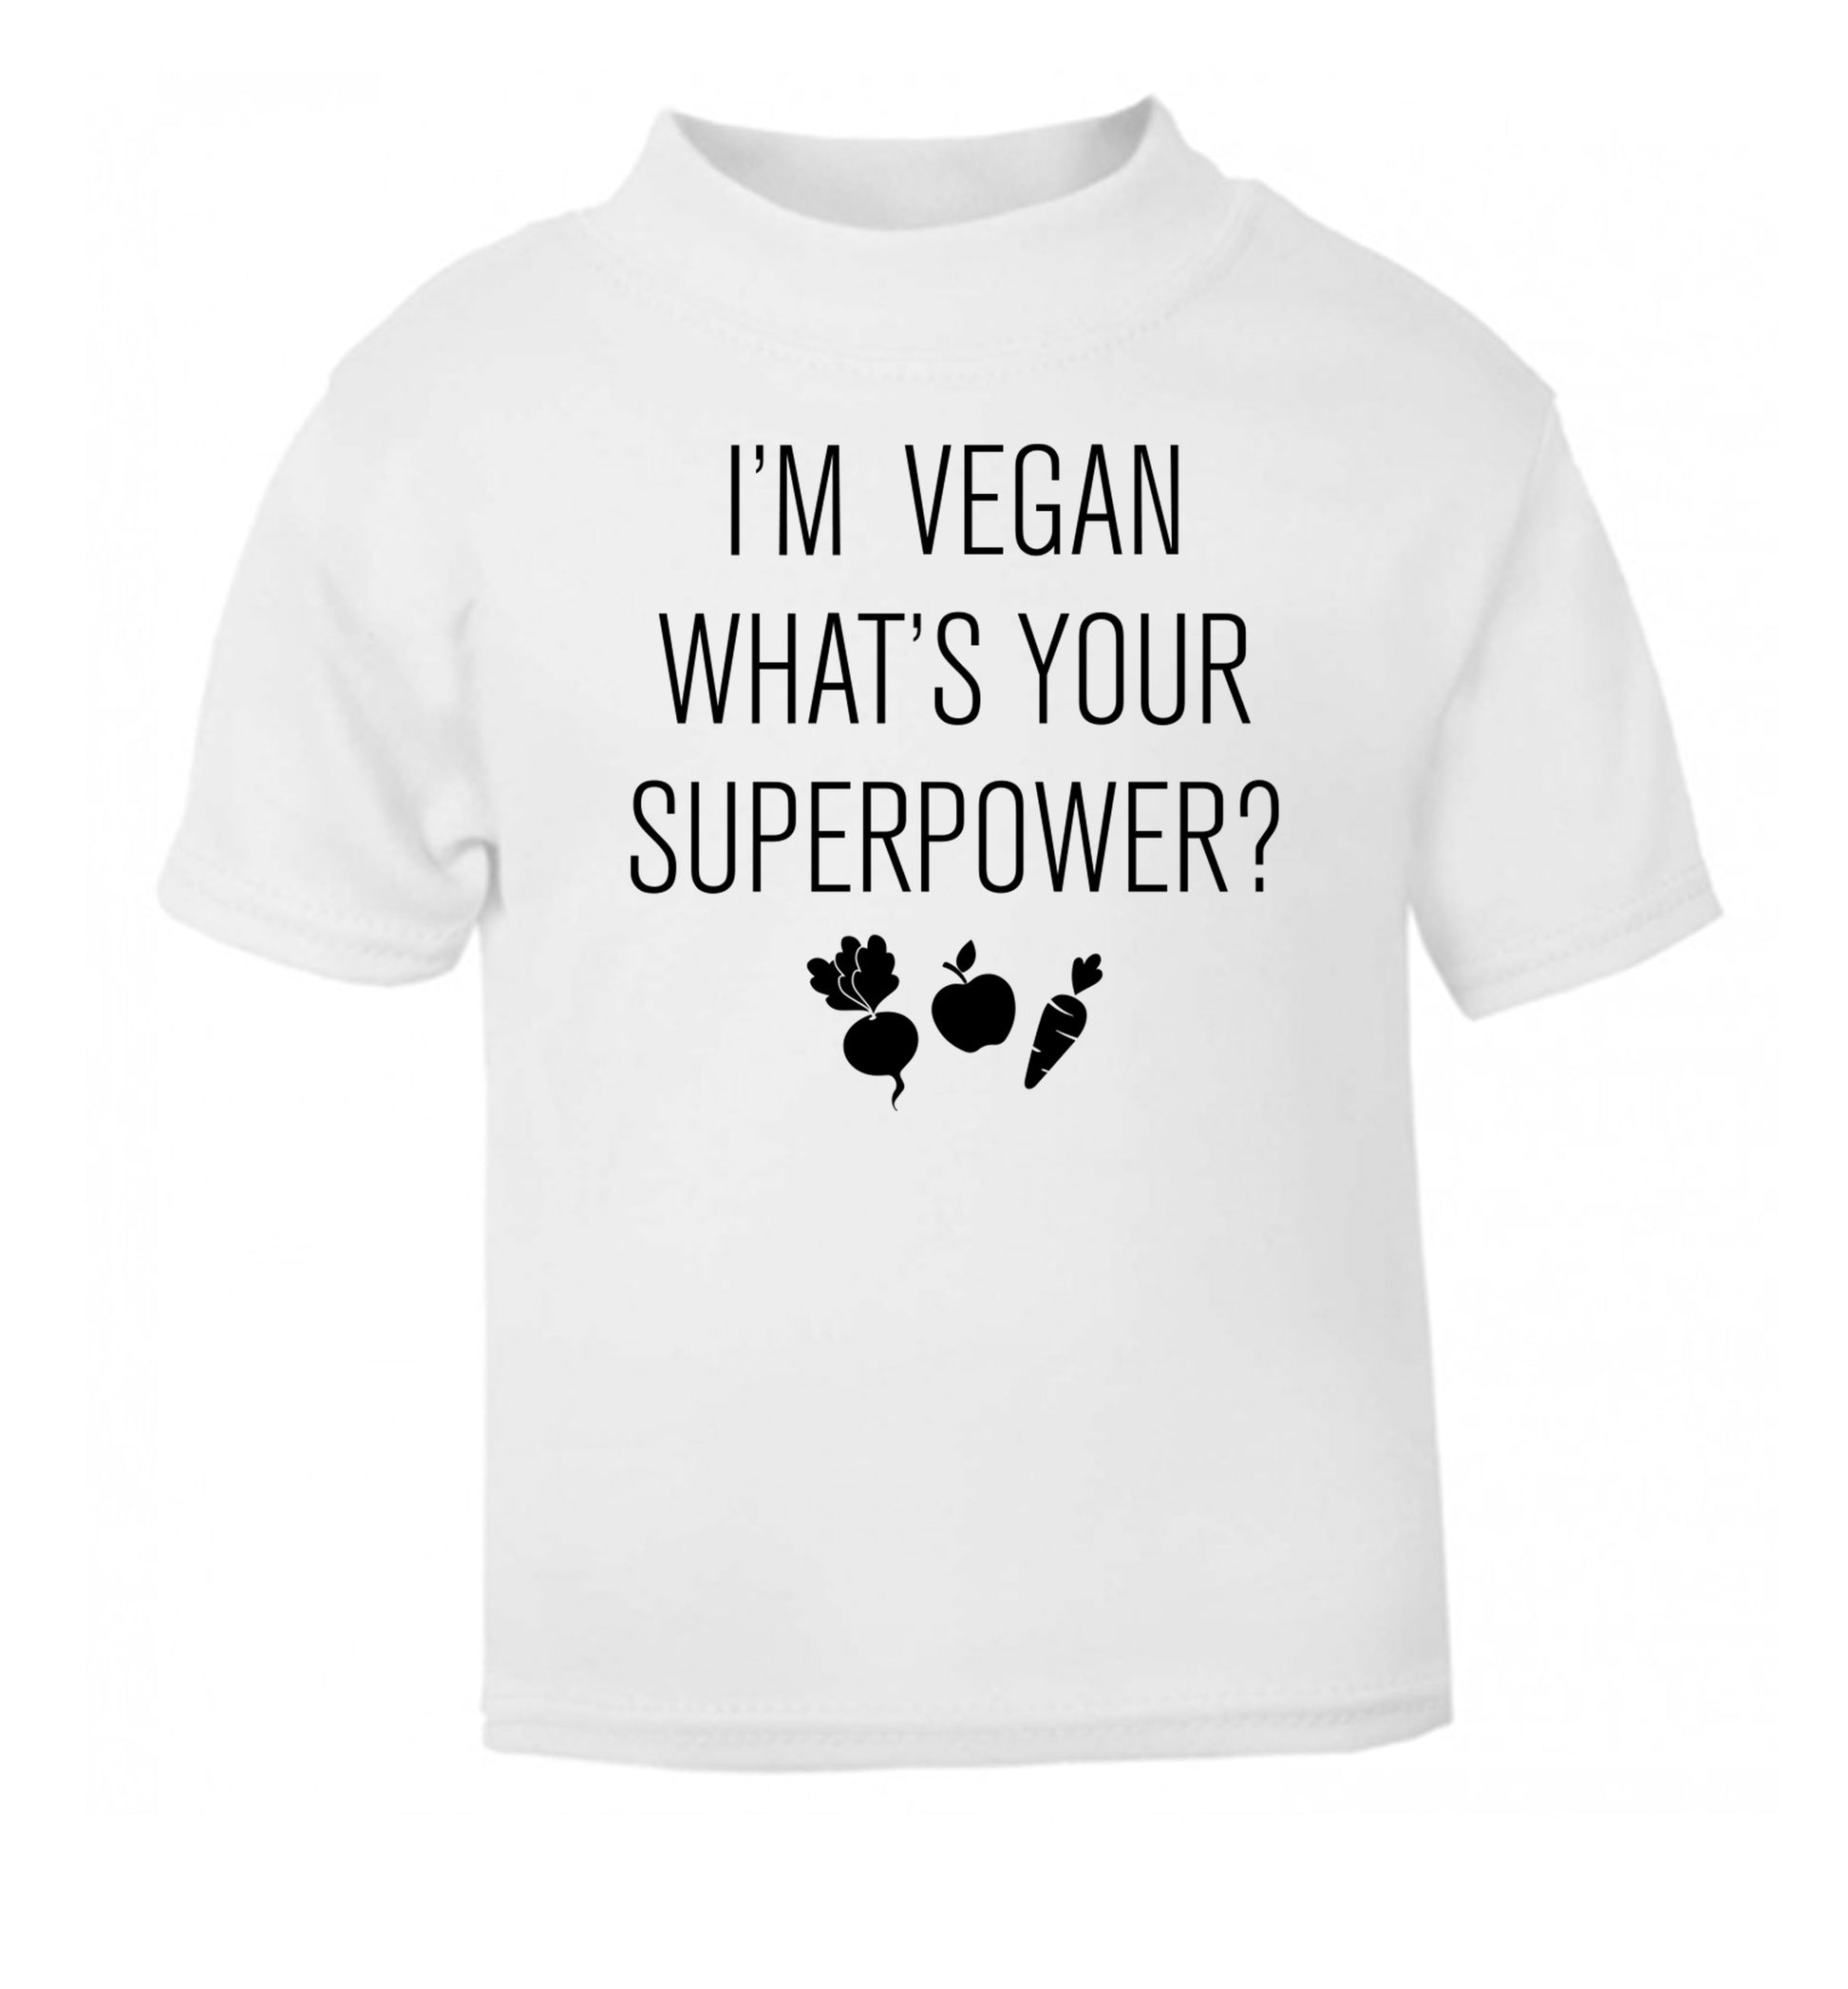 I'm Vegan What's Your Superpower? white Baby Toddler Tshirt 2 Years